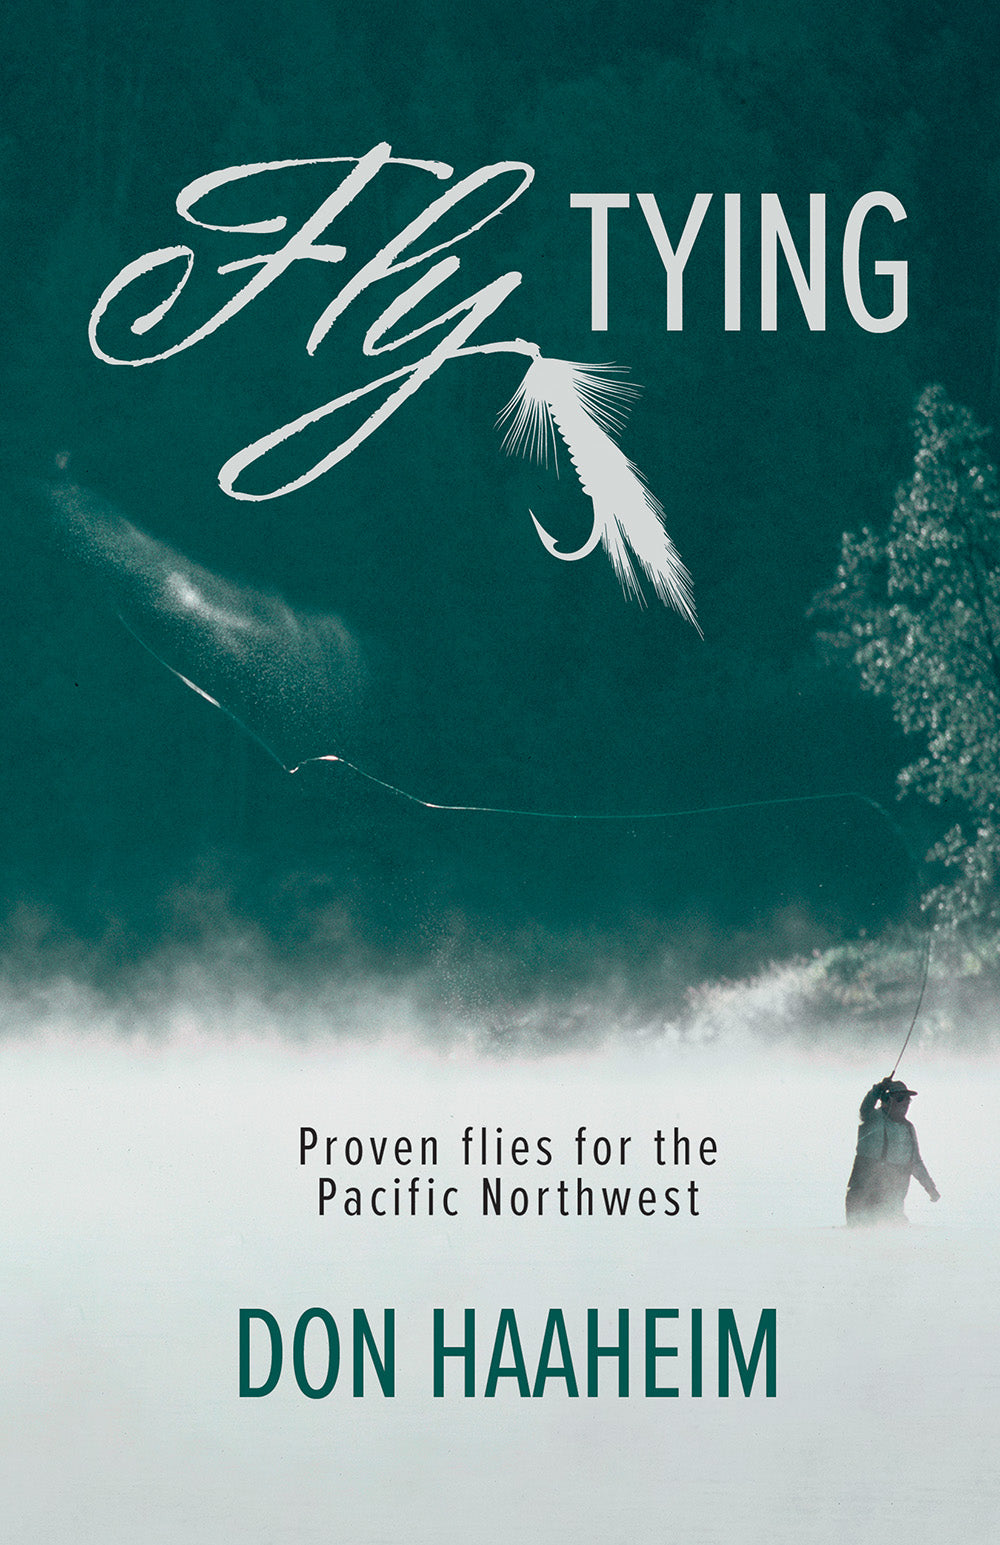 Fly Tying: Proven Flies for the Pacific Northwest- Hancock House